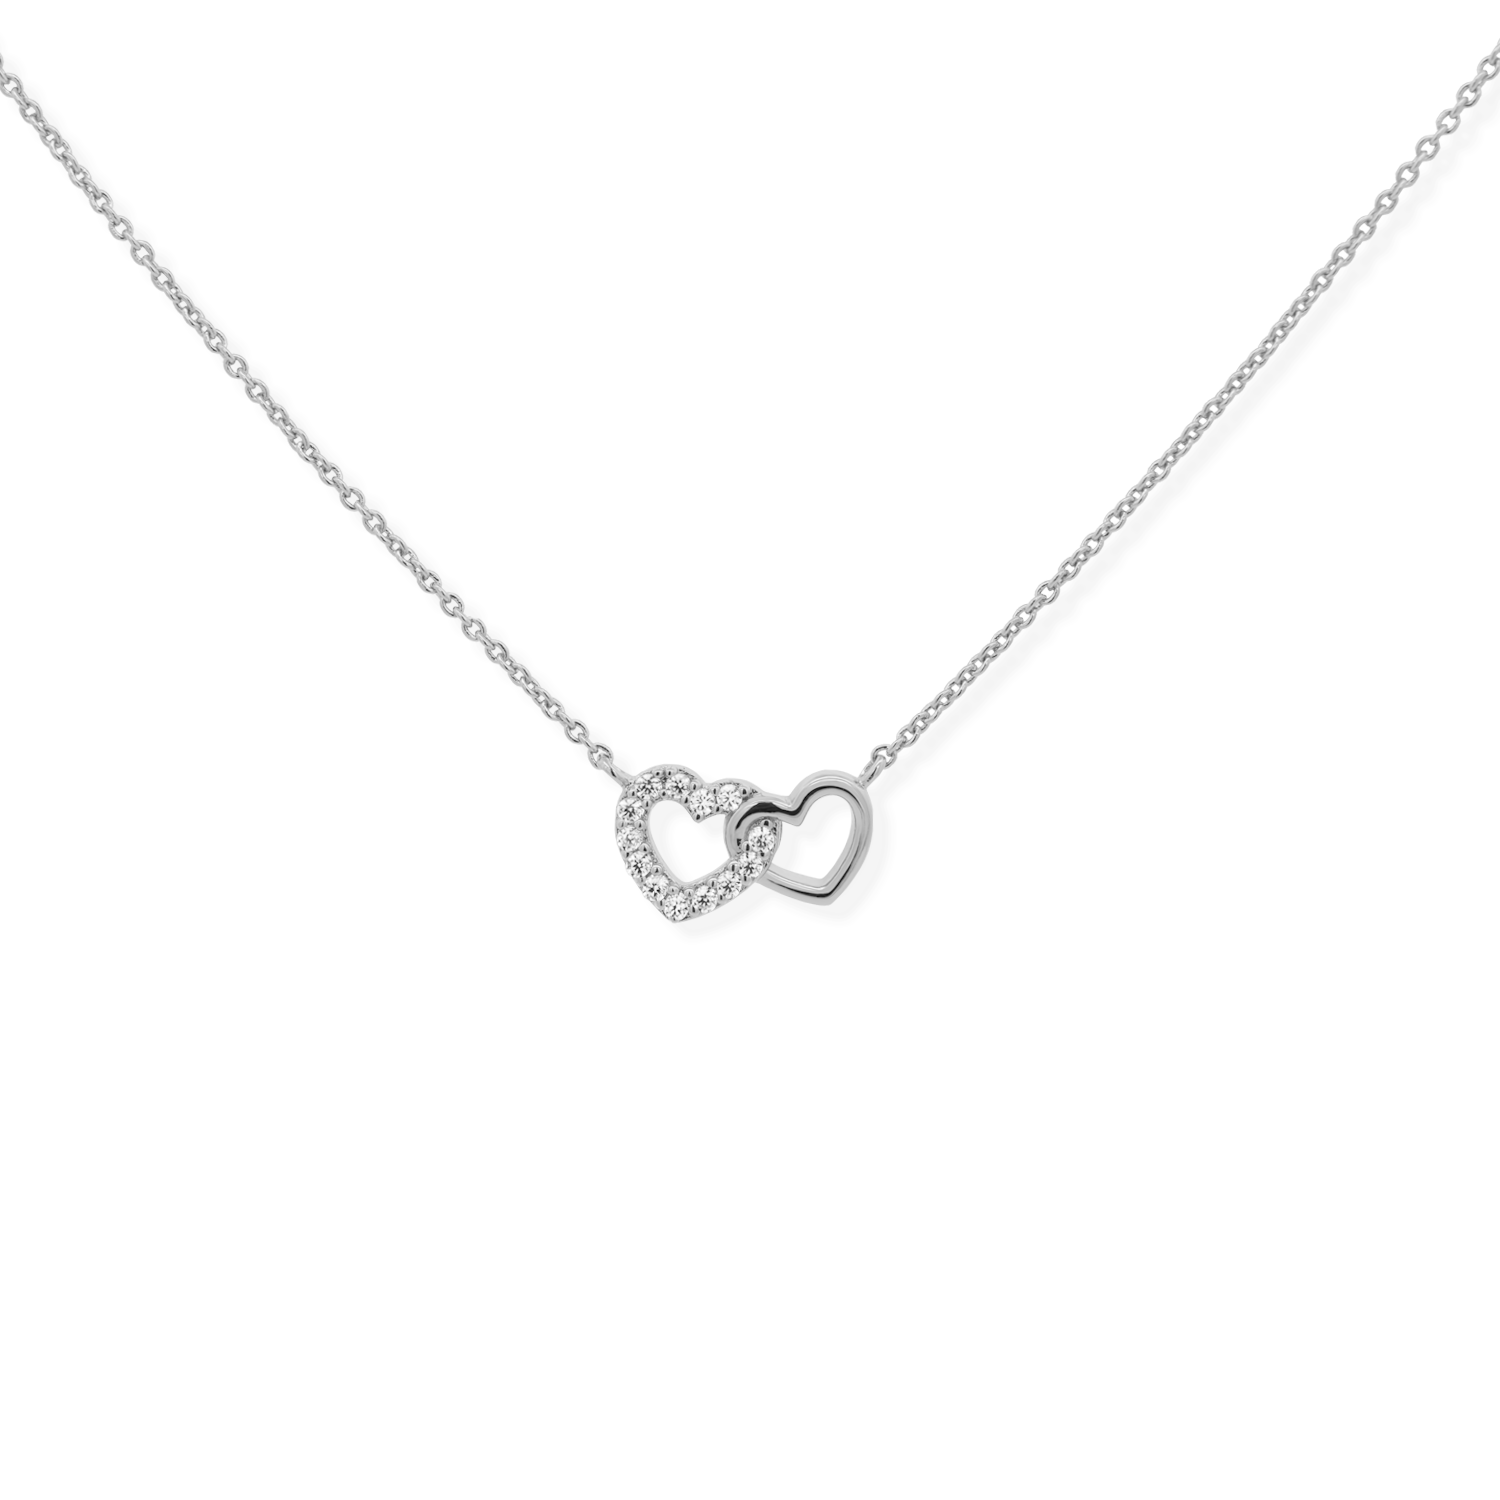 Elegant and dainty necklace with cubic zirconia stones in silver.